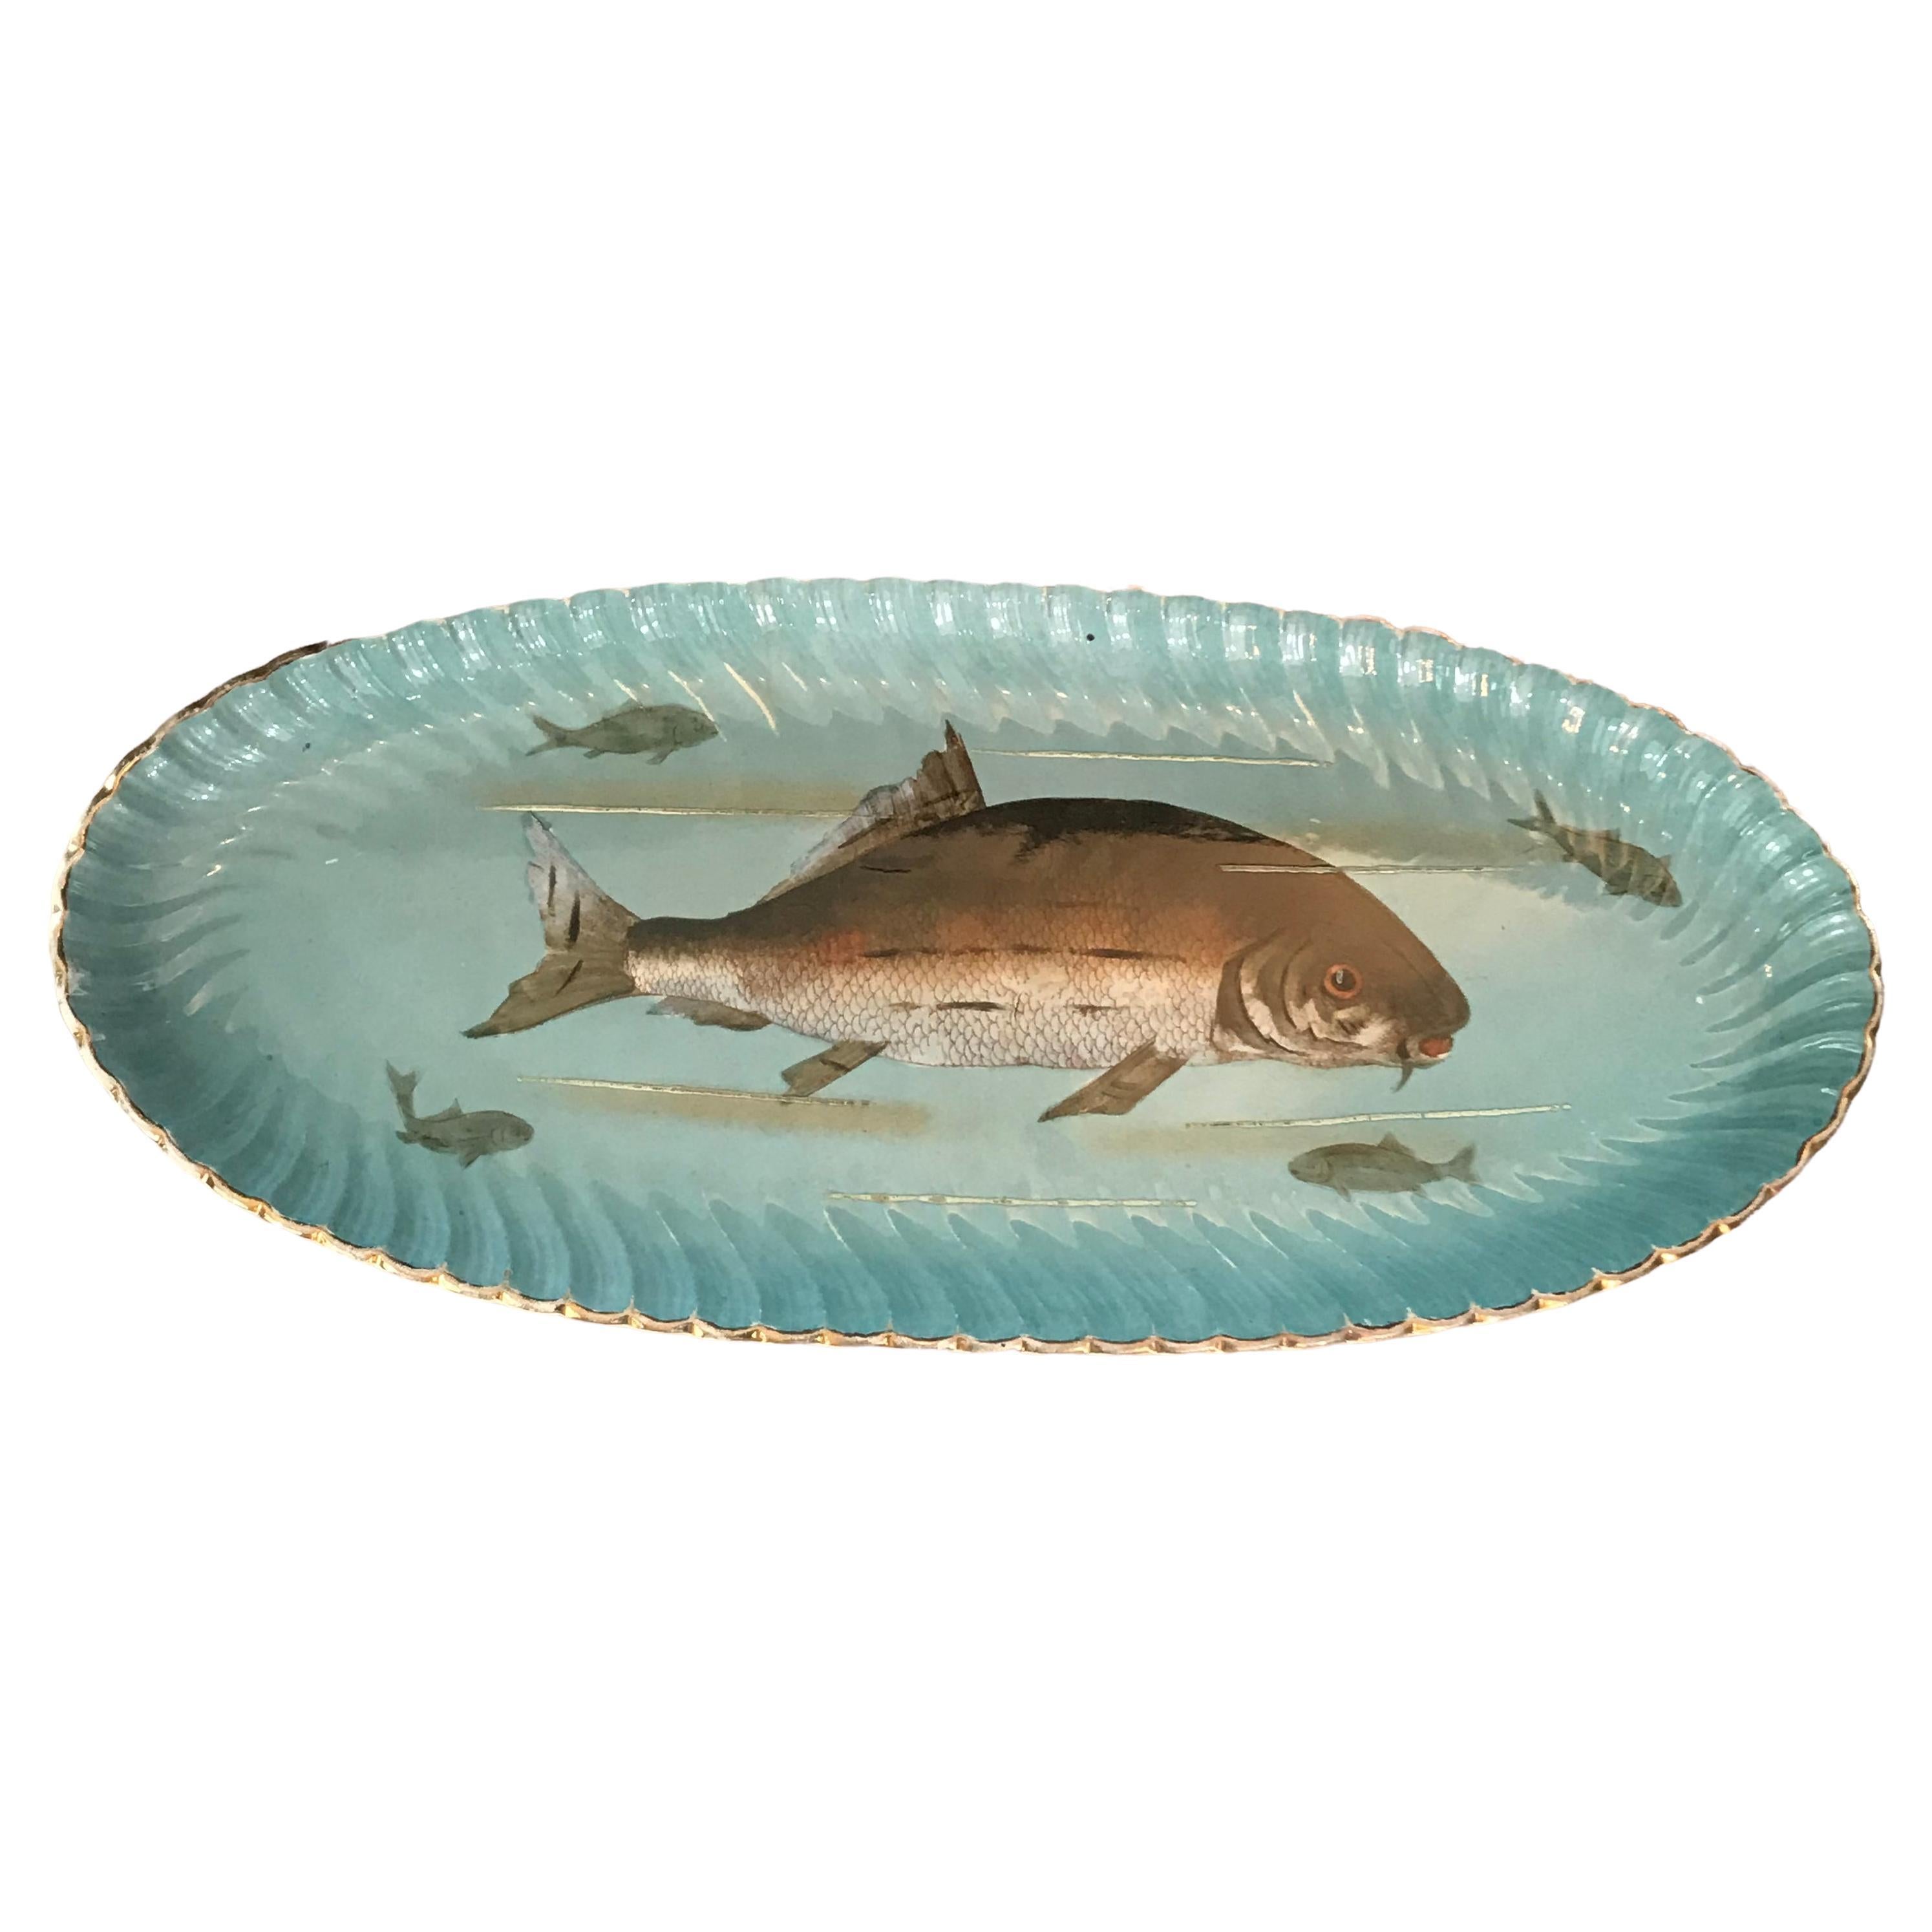 Signed and hand crafted stunning Fish Platter with 10 matching plates, all hand painted in beautiful colors Handmade by Franz Anton Mehlem, a German pottery manufacturer. Mehlem produced in Bonn/Germany pottery from 1838 until 1931. Signed and